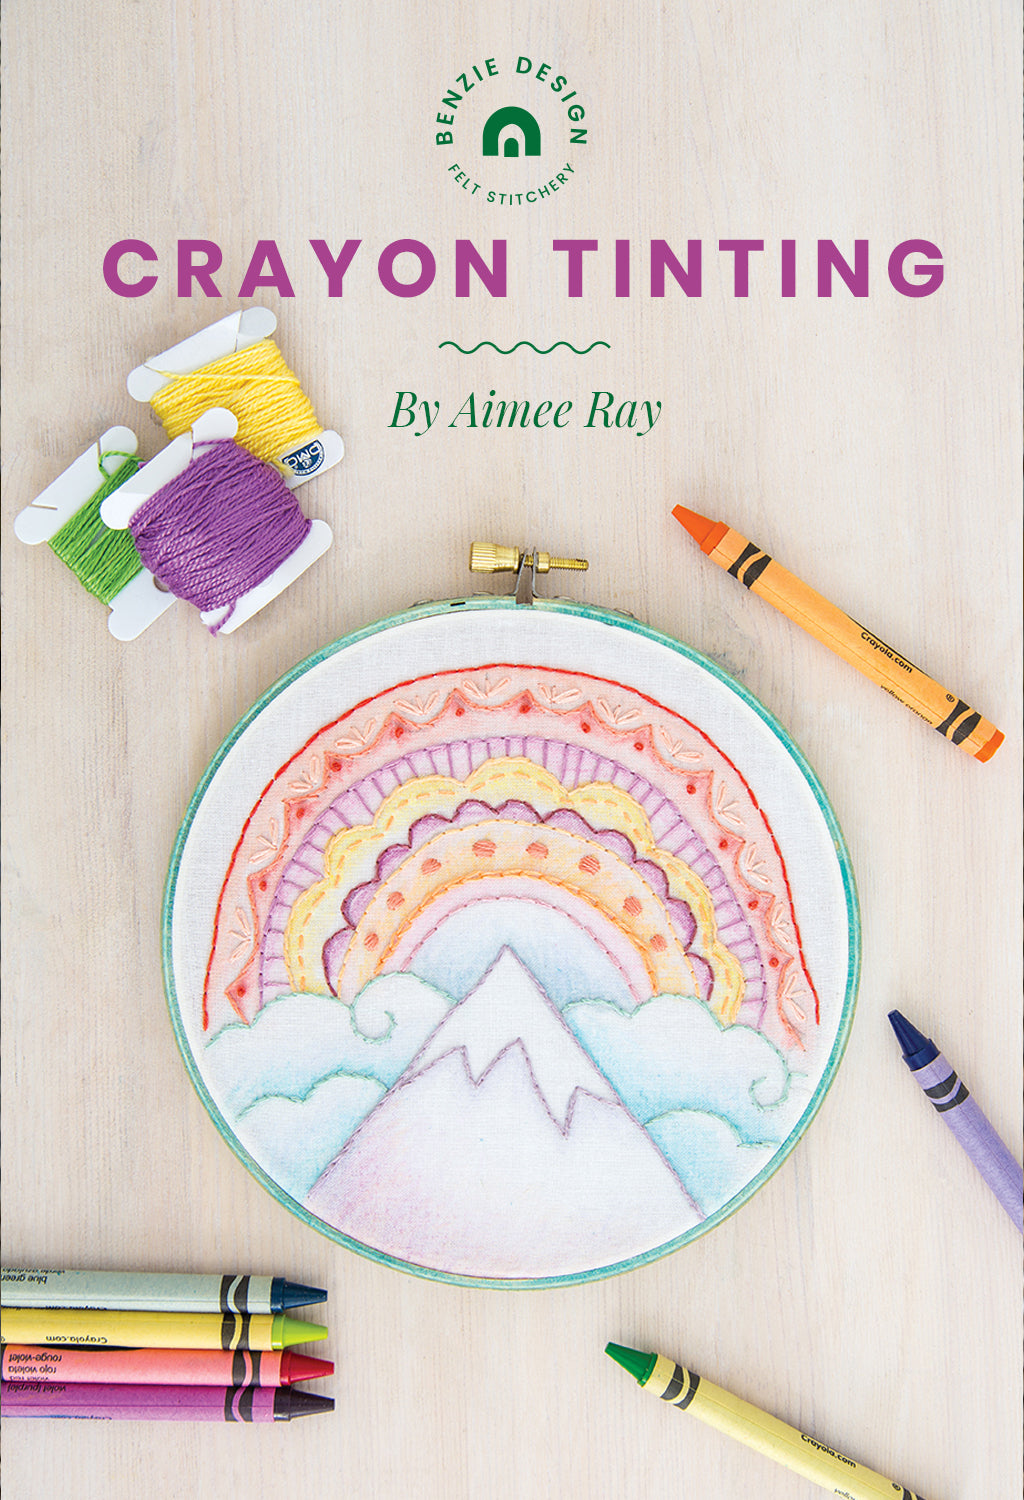 Doodle Stitching and Crayon Tinting with Author Aimee Ray – Benzie Design